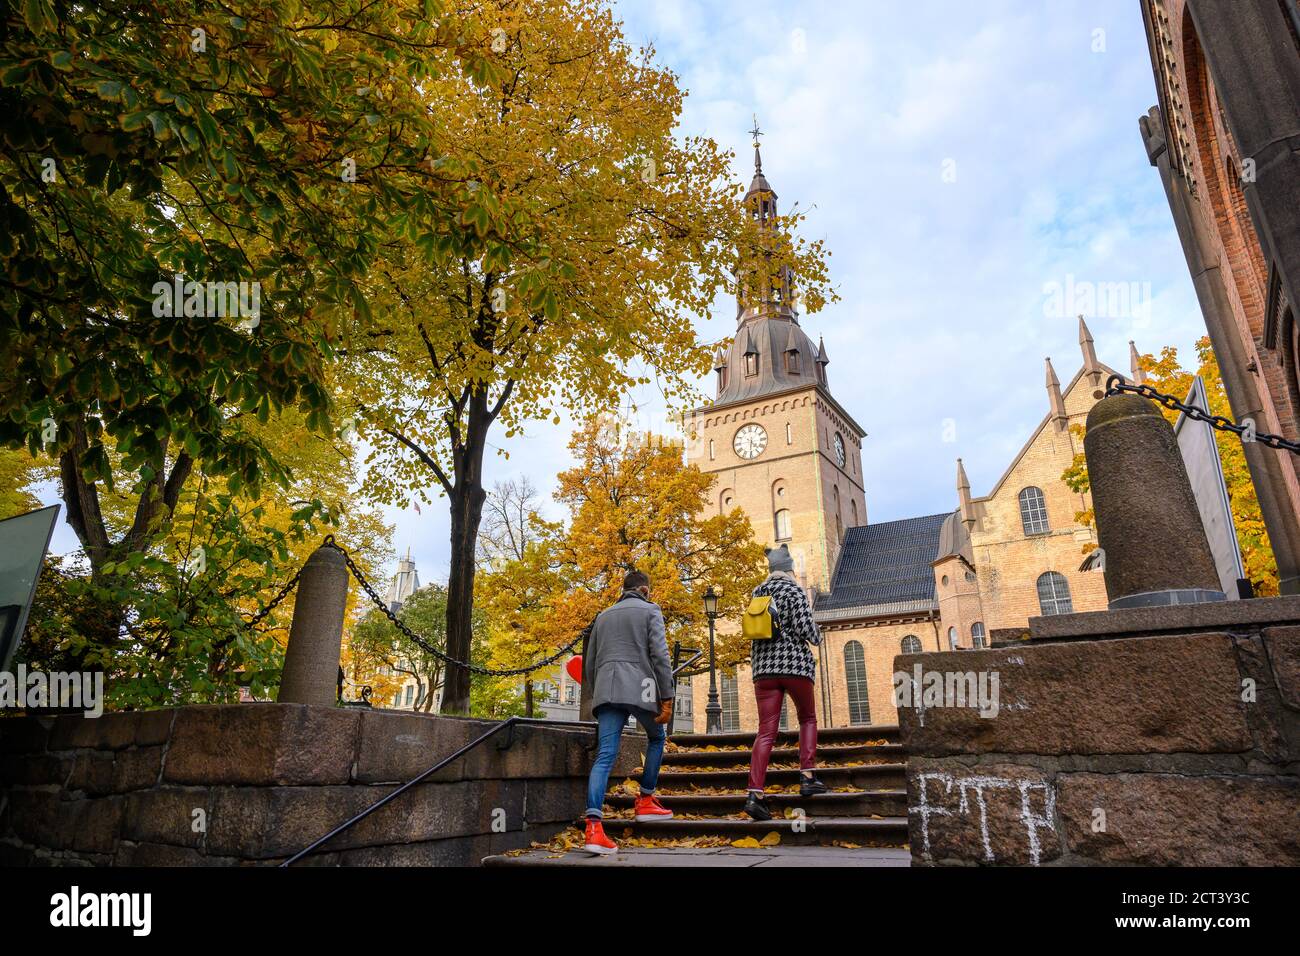 Two people are walking up the stairs to the Oslo Cathedral, located in the center of Oslo, Norway. In autumn, the leaves turn yellow and orange. Stock Photo